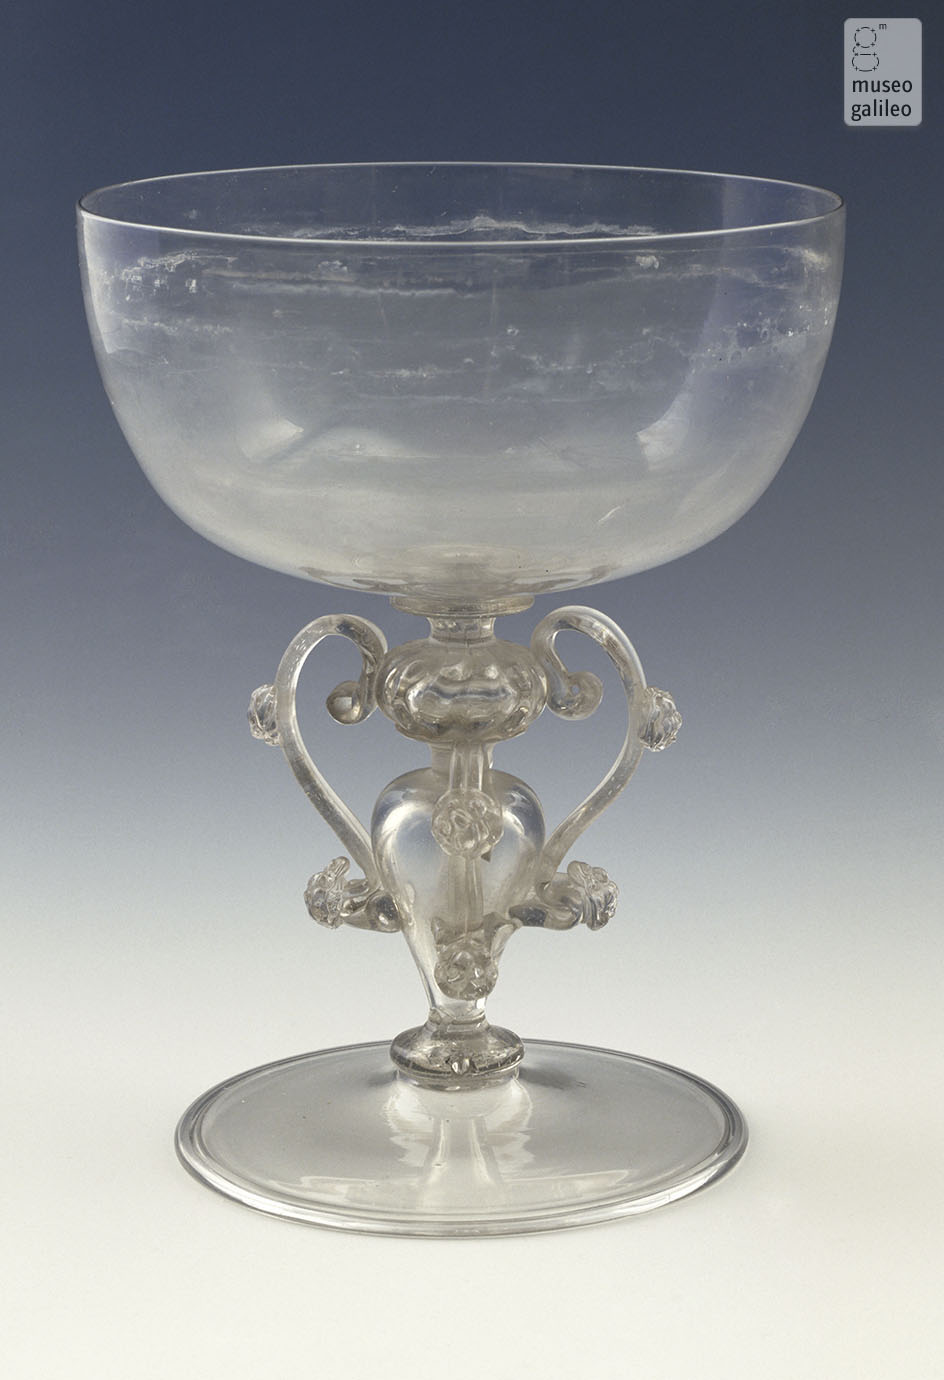 Chalice with fins (Inv. 341/38)